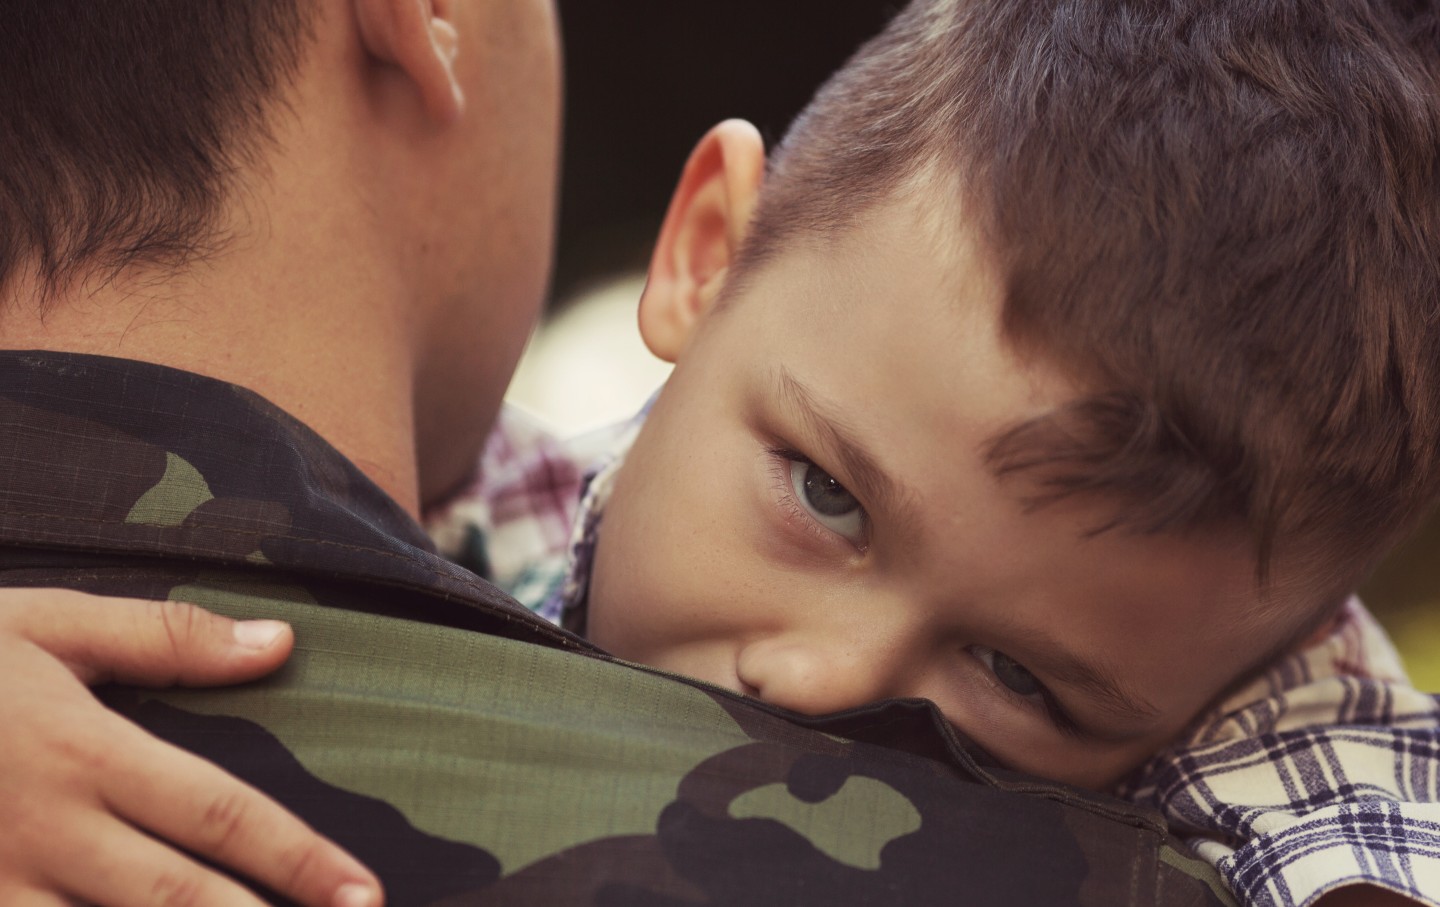 How Covid-19 Is Affecting Military Families